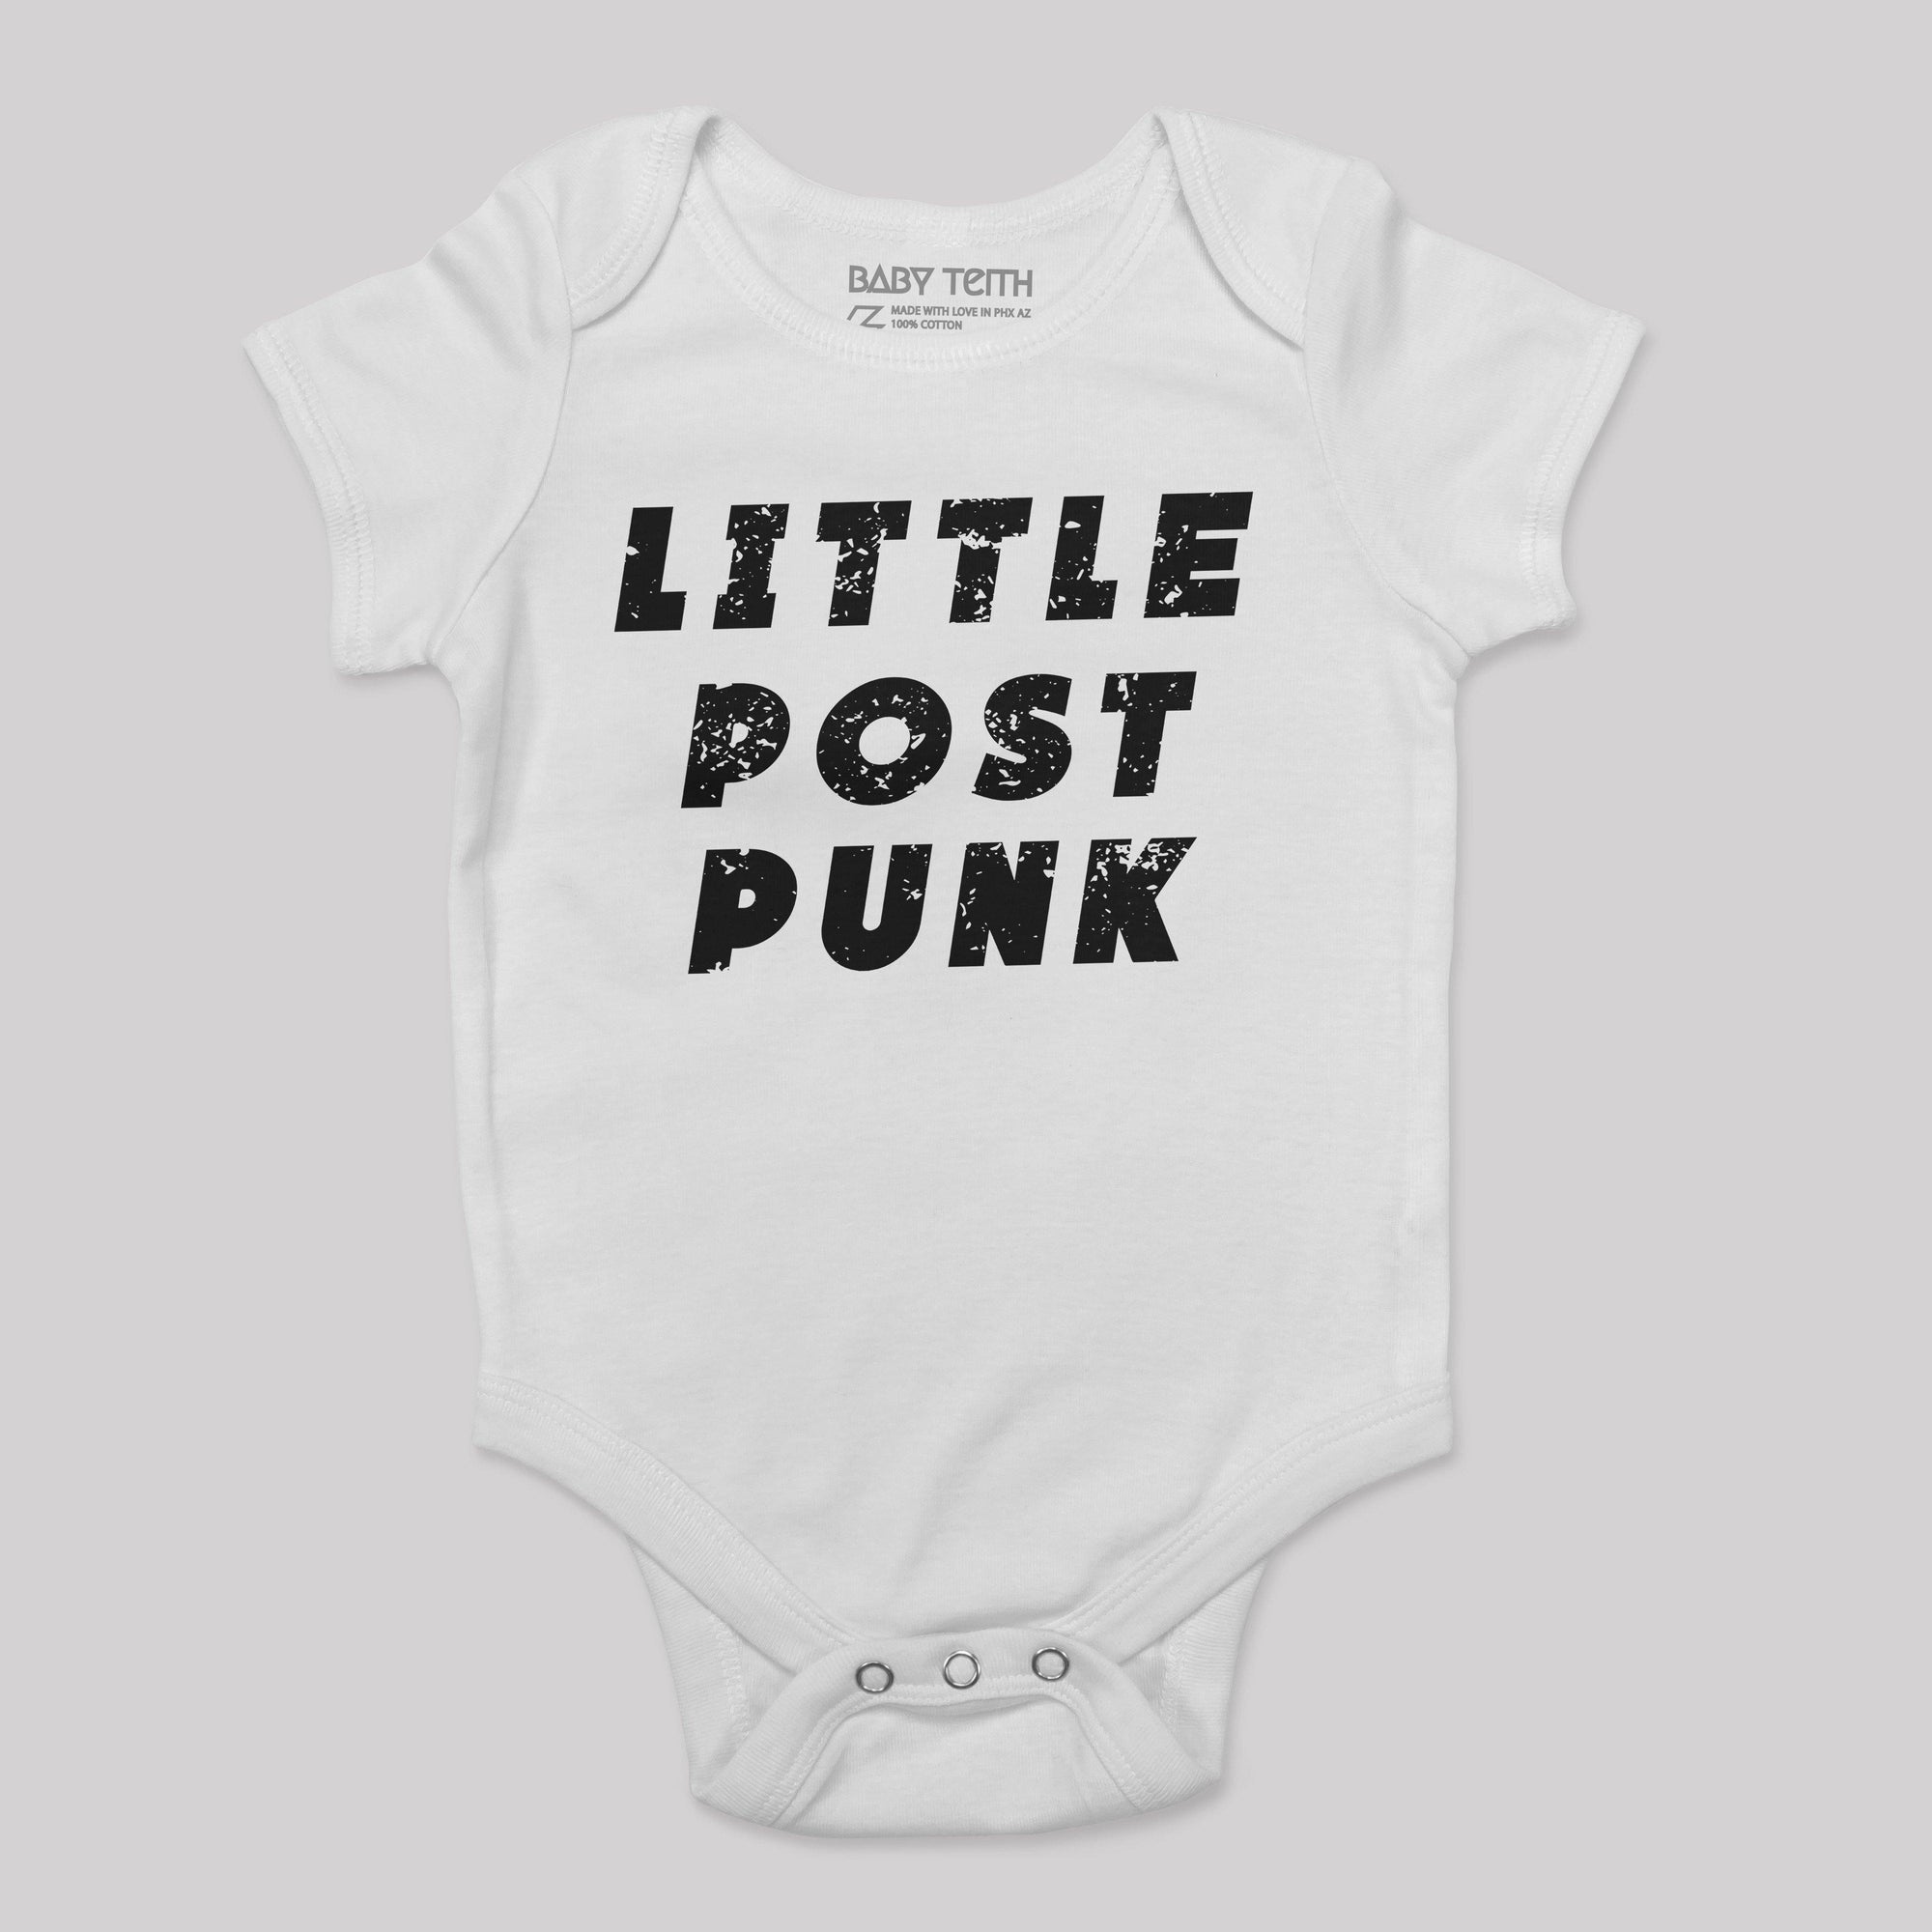 "Little Post Punk" Bodysuit for Babies - Baby Teith